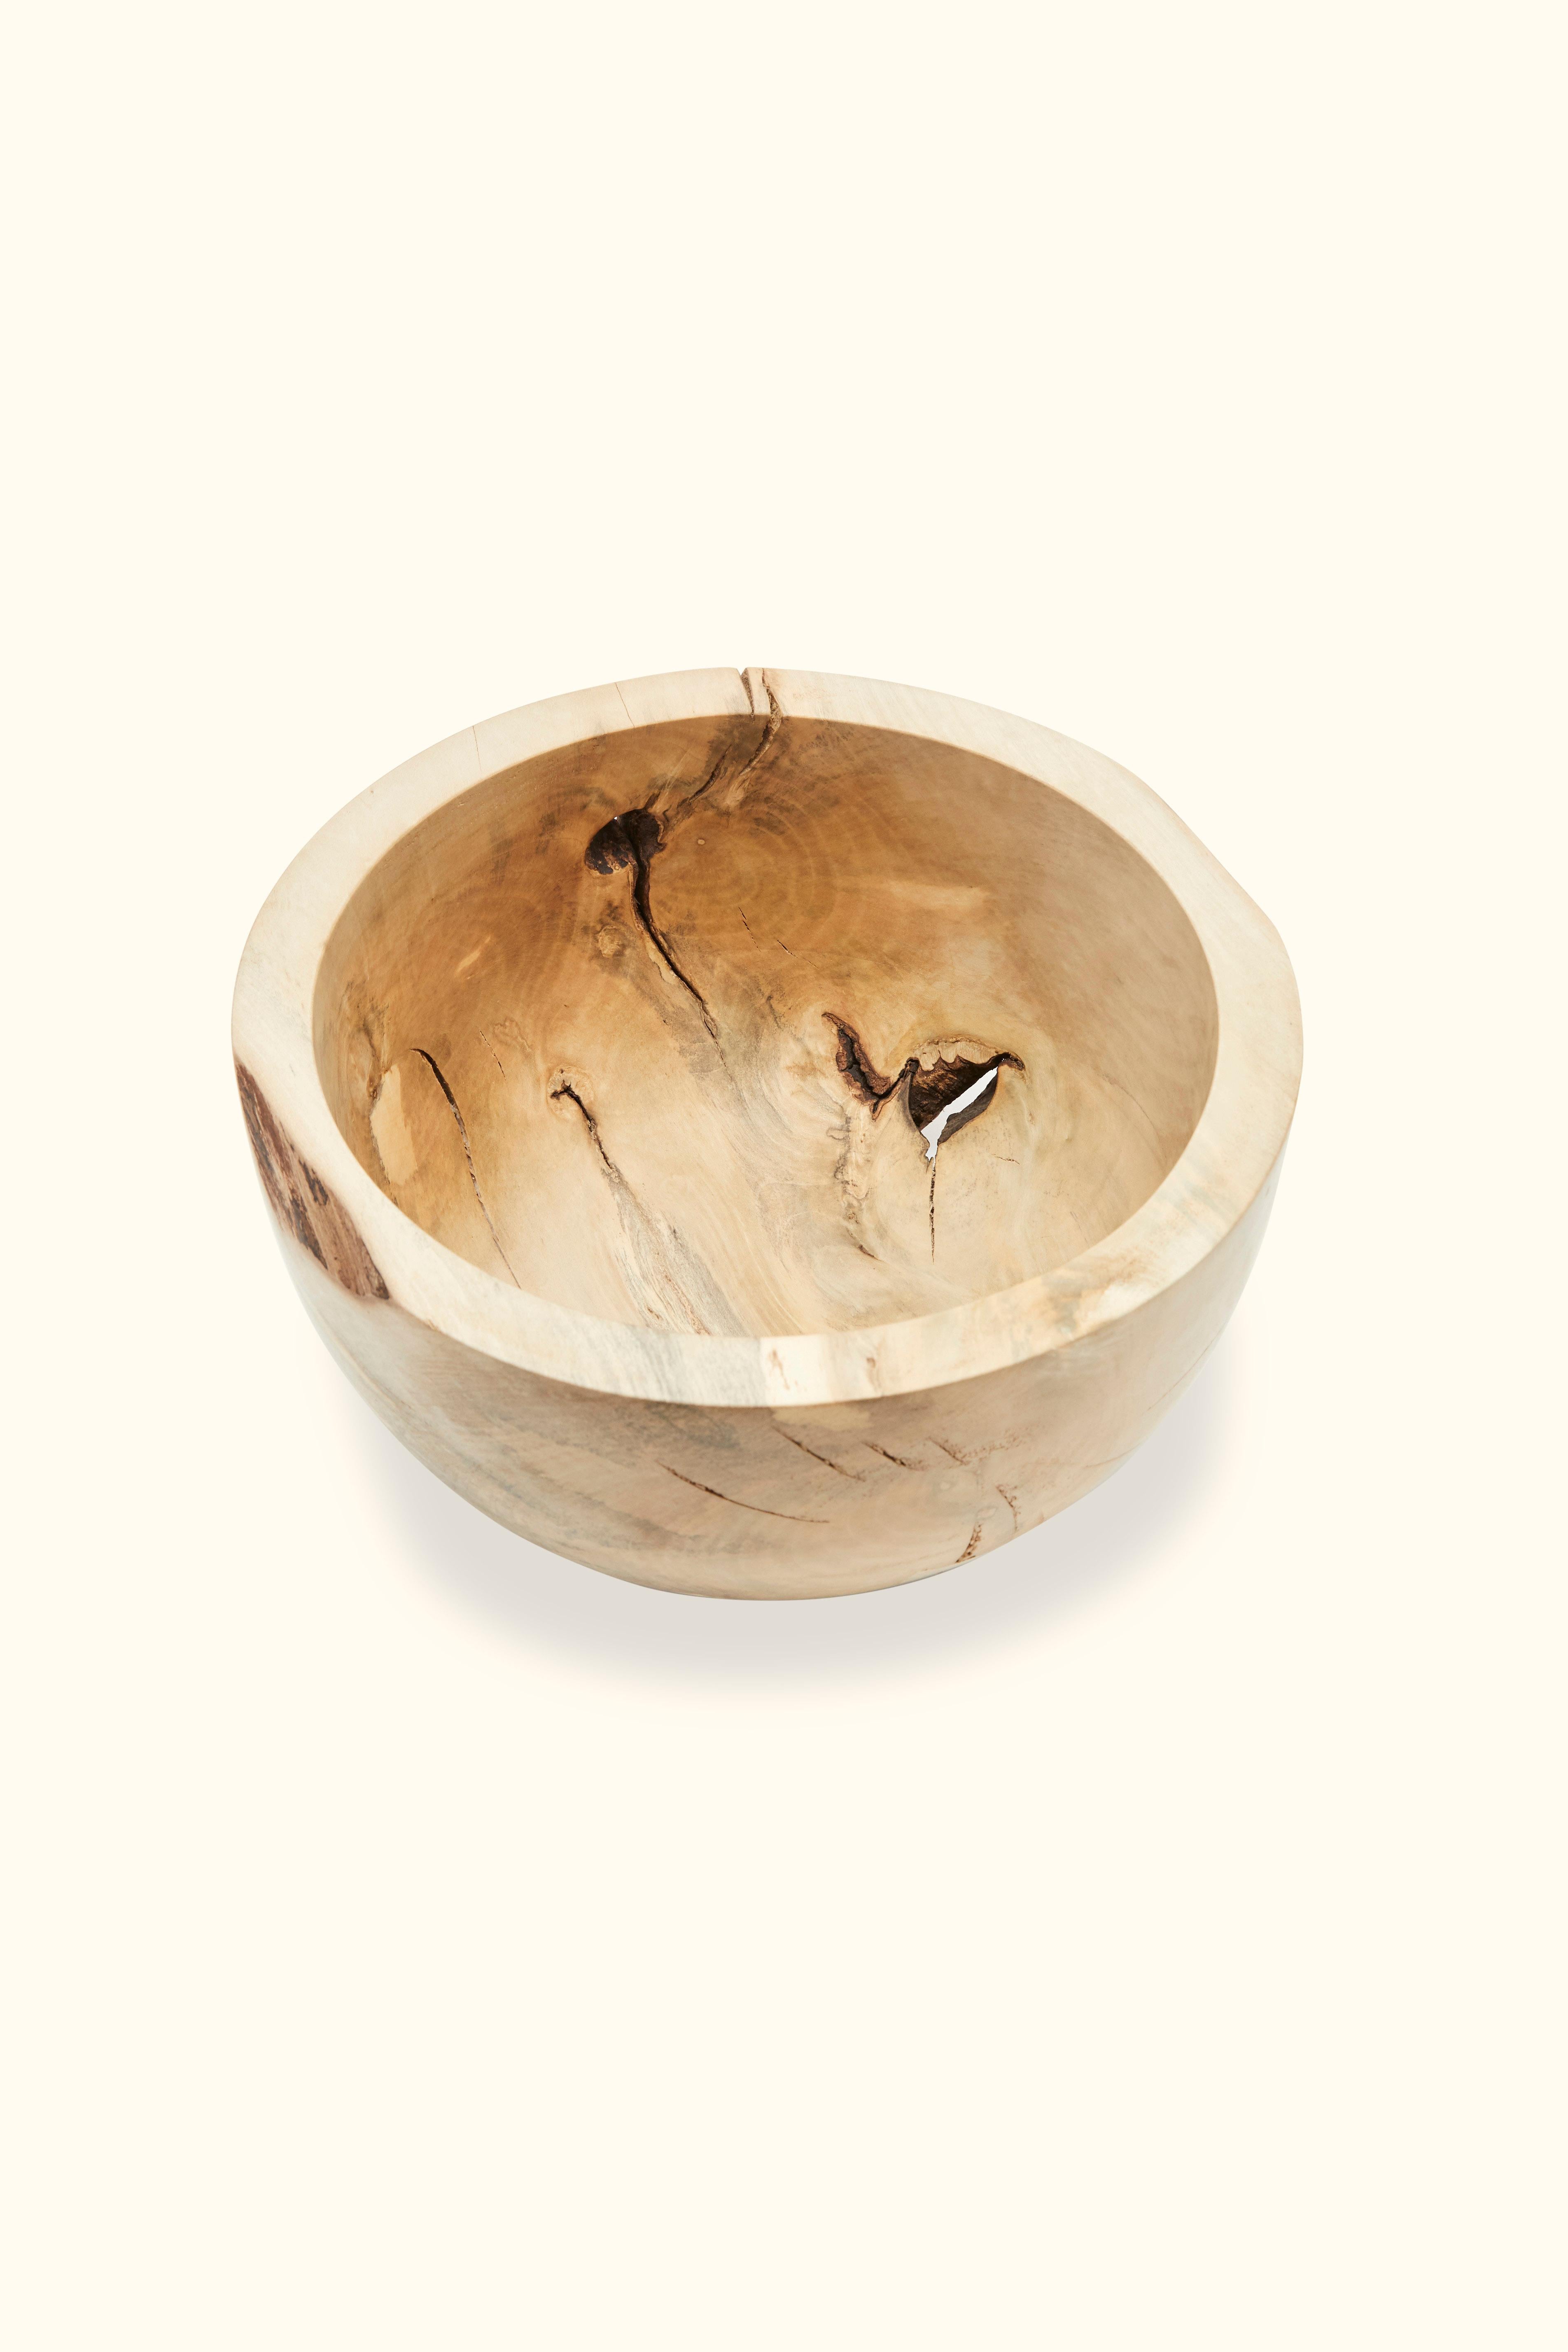 Wooden Bowl by Wyatt Speight Rhue.

Wood species, dimensions, color and grain pattern may vary.